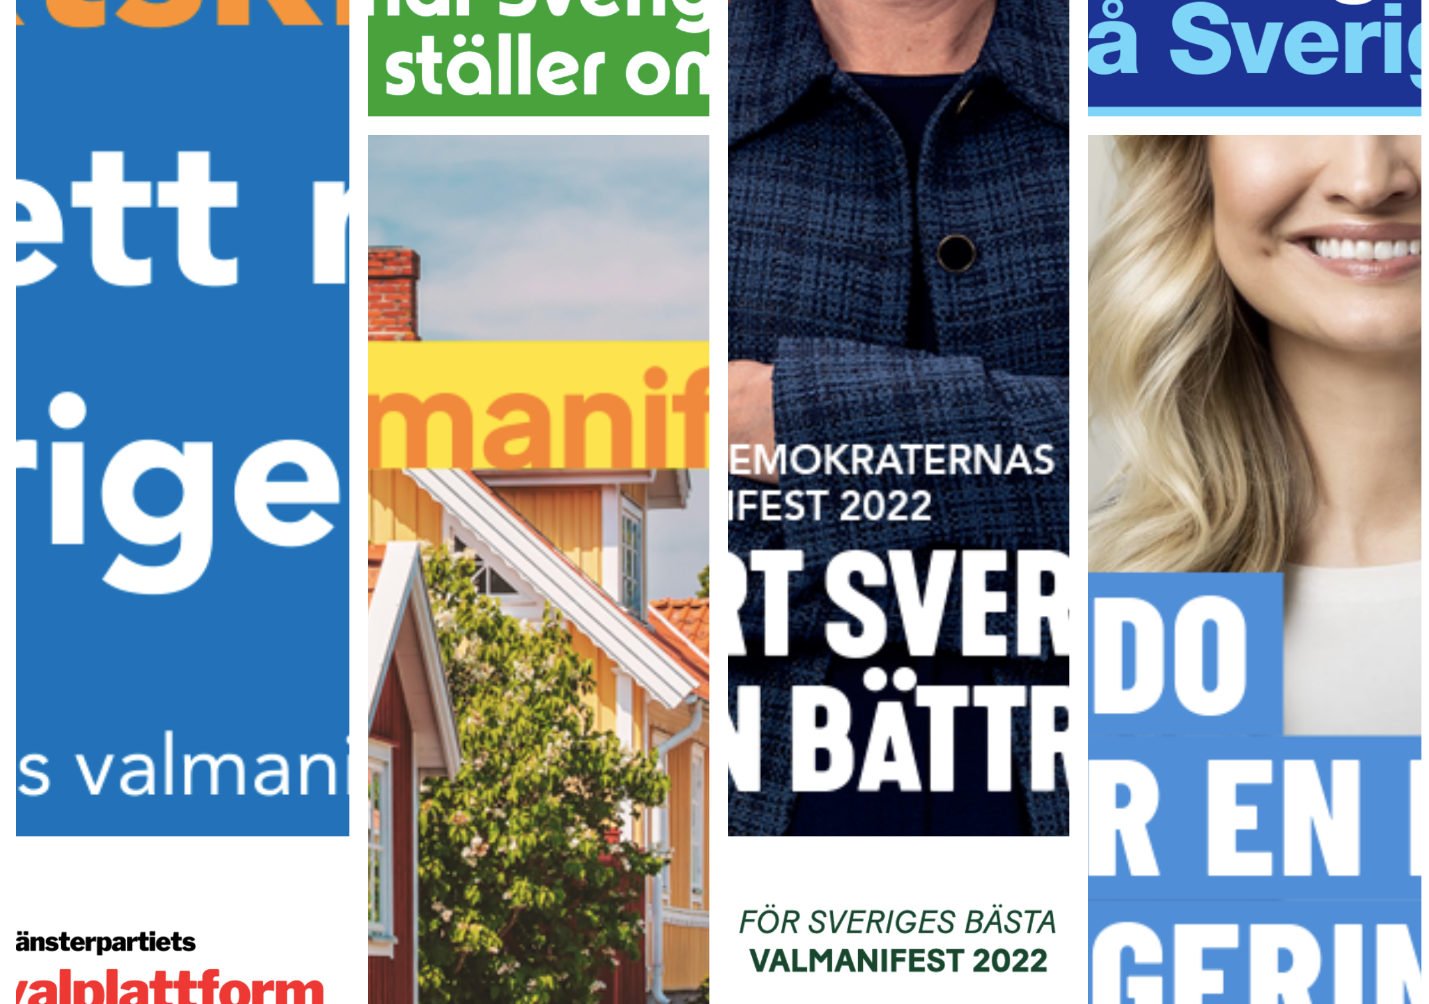 The seven election manifestos from Sweden's political parties